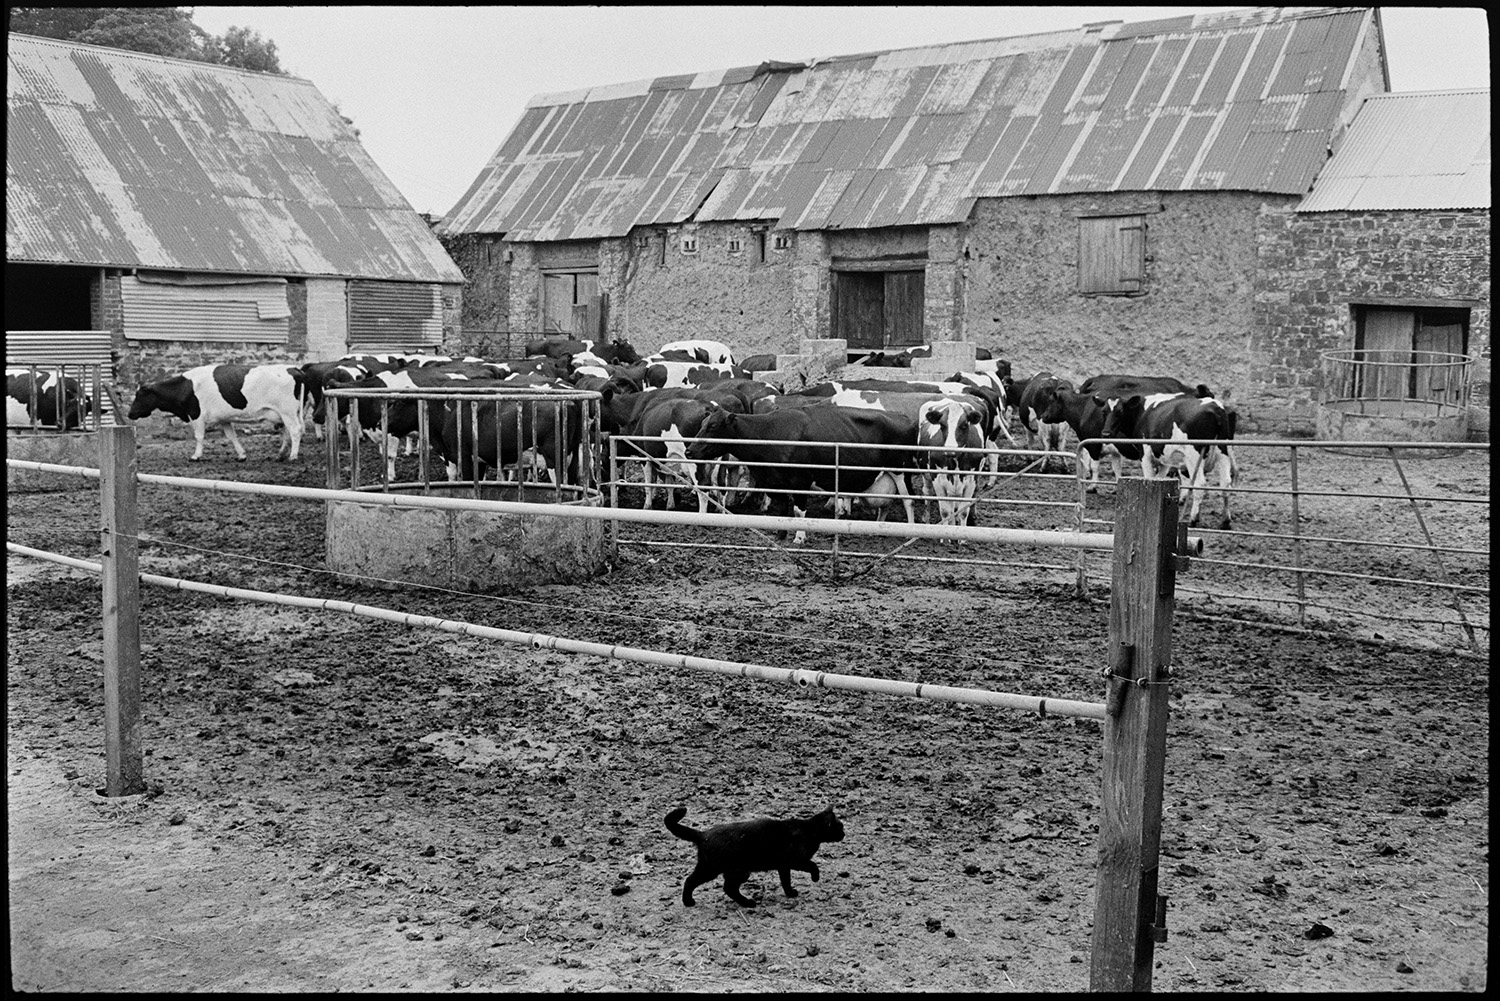 Cows in farmyard, cat. 
[A cat walking through a muddy farmyard with cows and a feeder at Ashbury. Cob, stone and corrugated iron barns are visible in the background.]